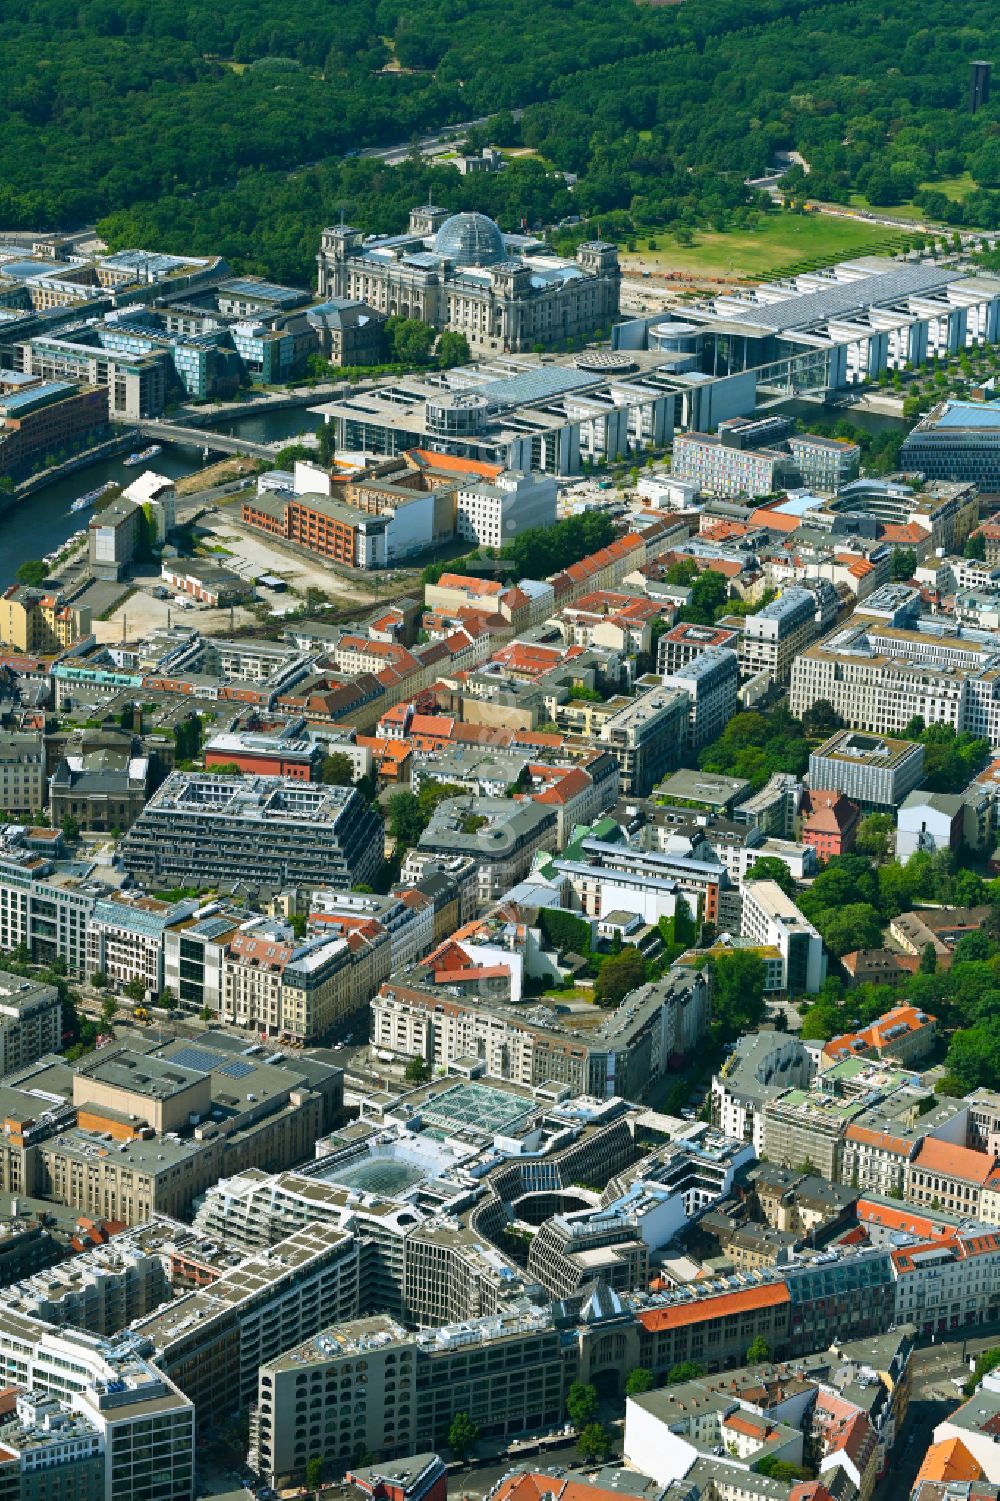 Aerial photograph Berlin - Areal on Tacheles on Oranienburger Strasse in the district Mitte in Berlin, Germany